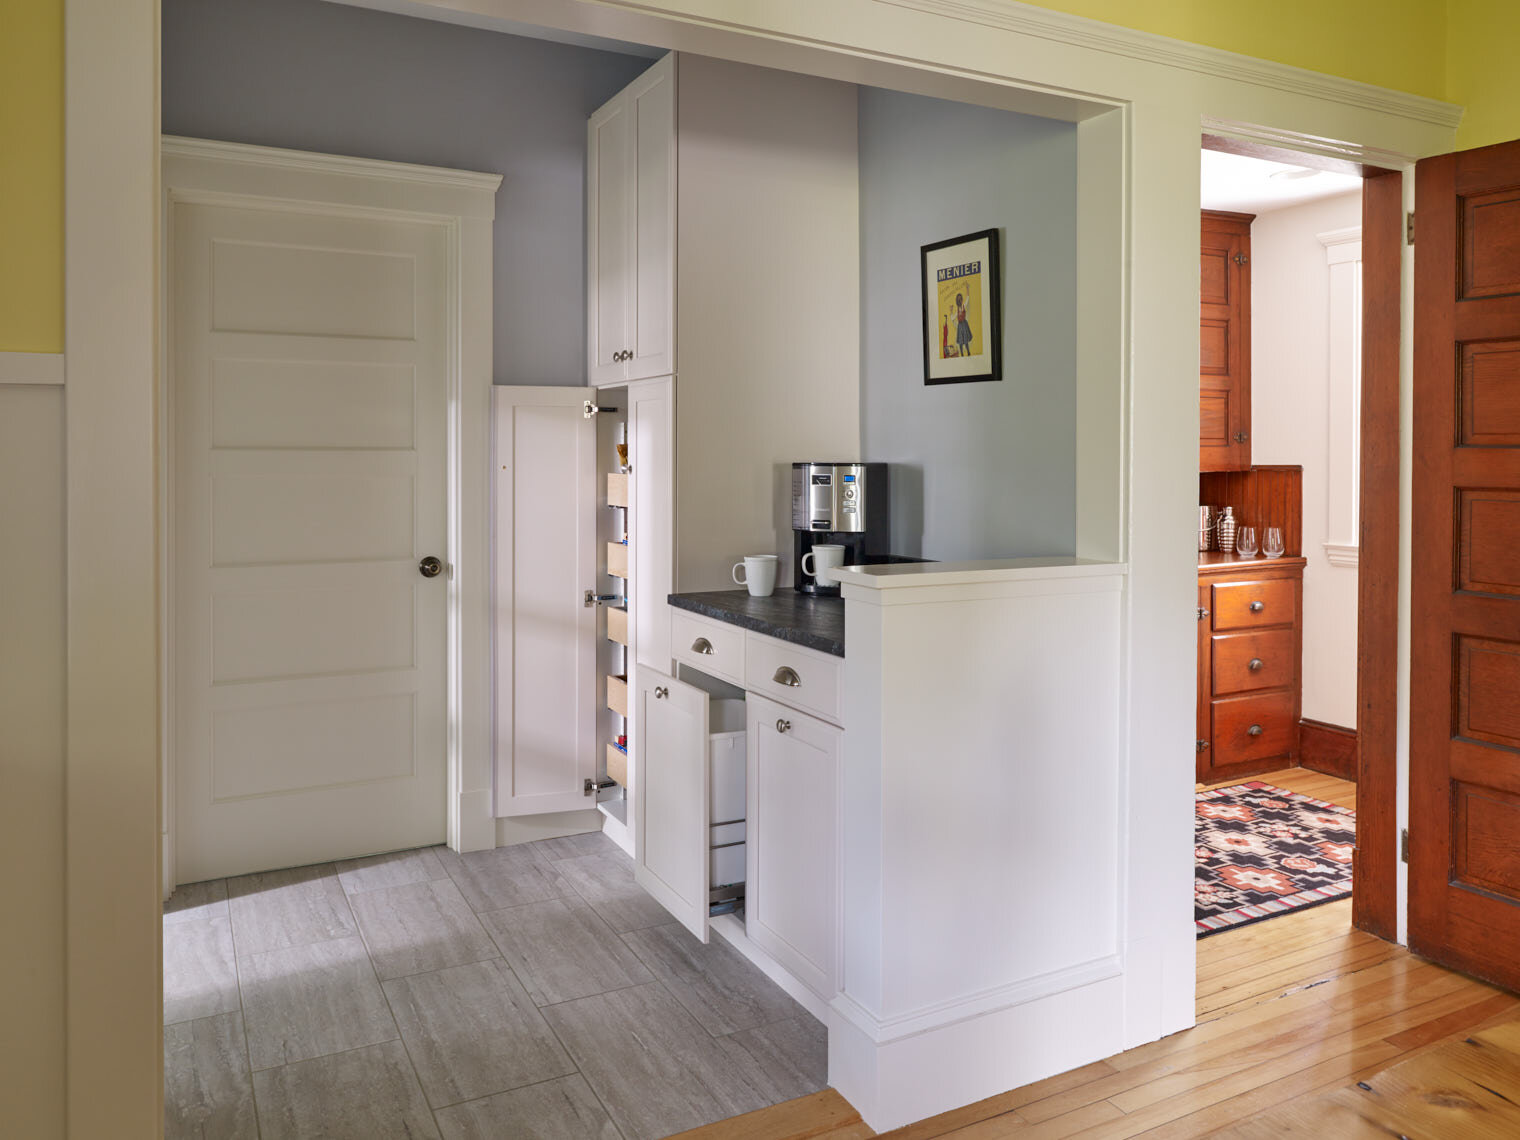  SHINGLE STYLE UPDATE  Pantry area showing storage spaces   